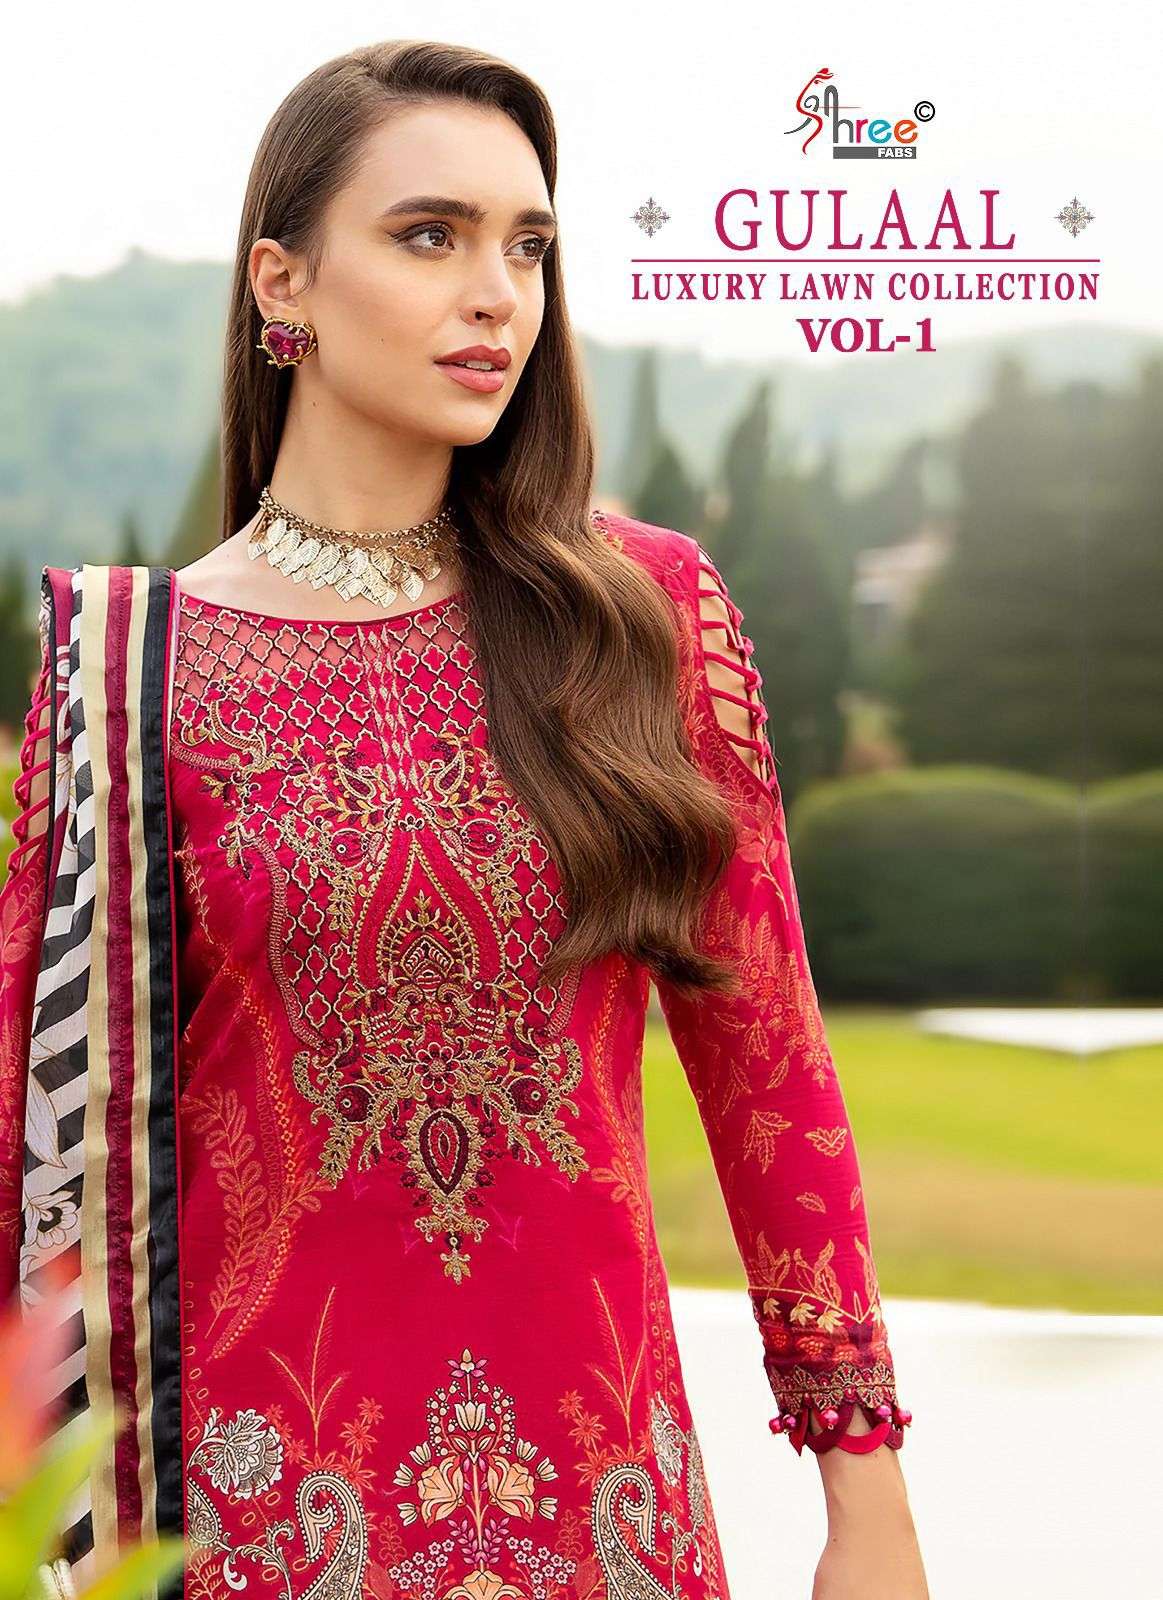 GULAAL LUXURY LAWN COLLECTION VOL 1 BY SHREE FABS LATEST CAT...